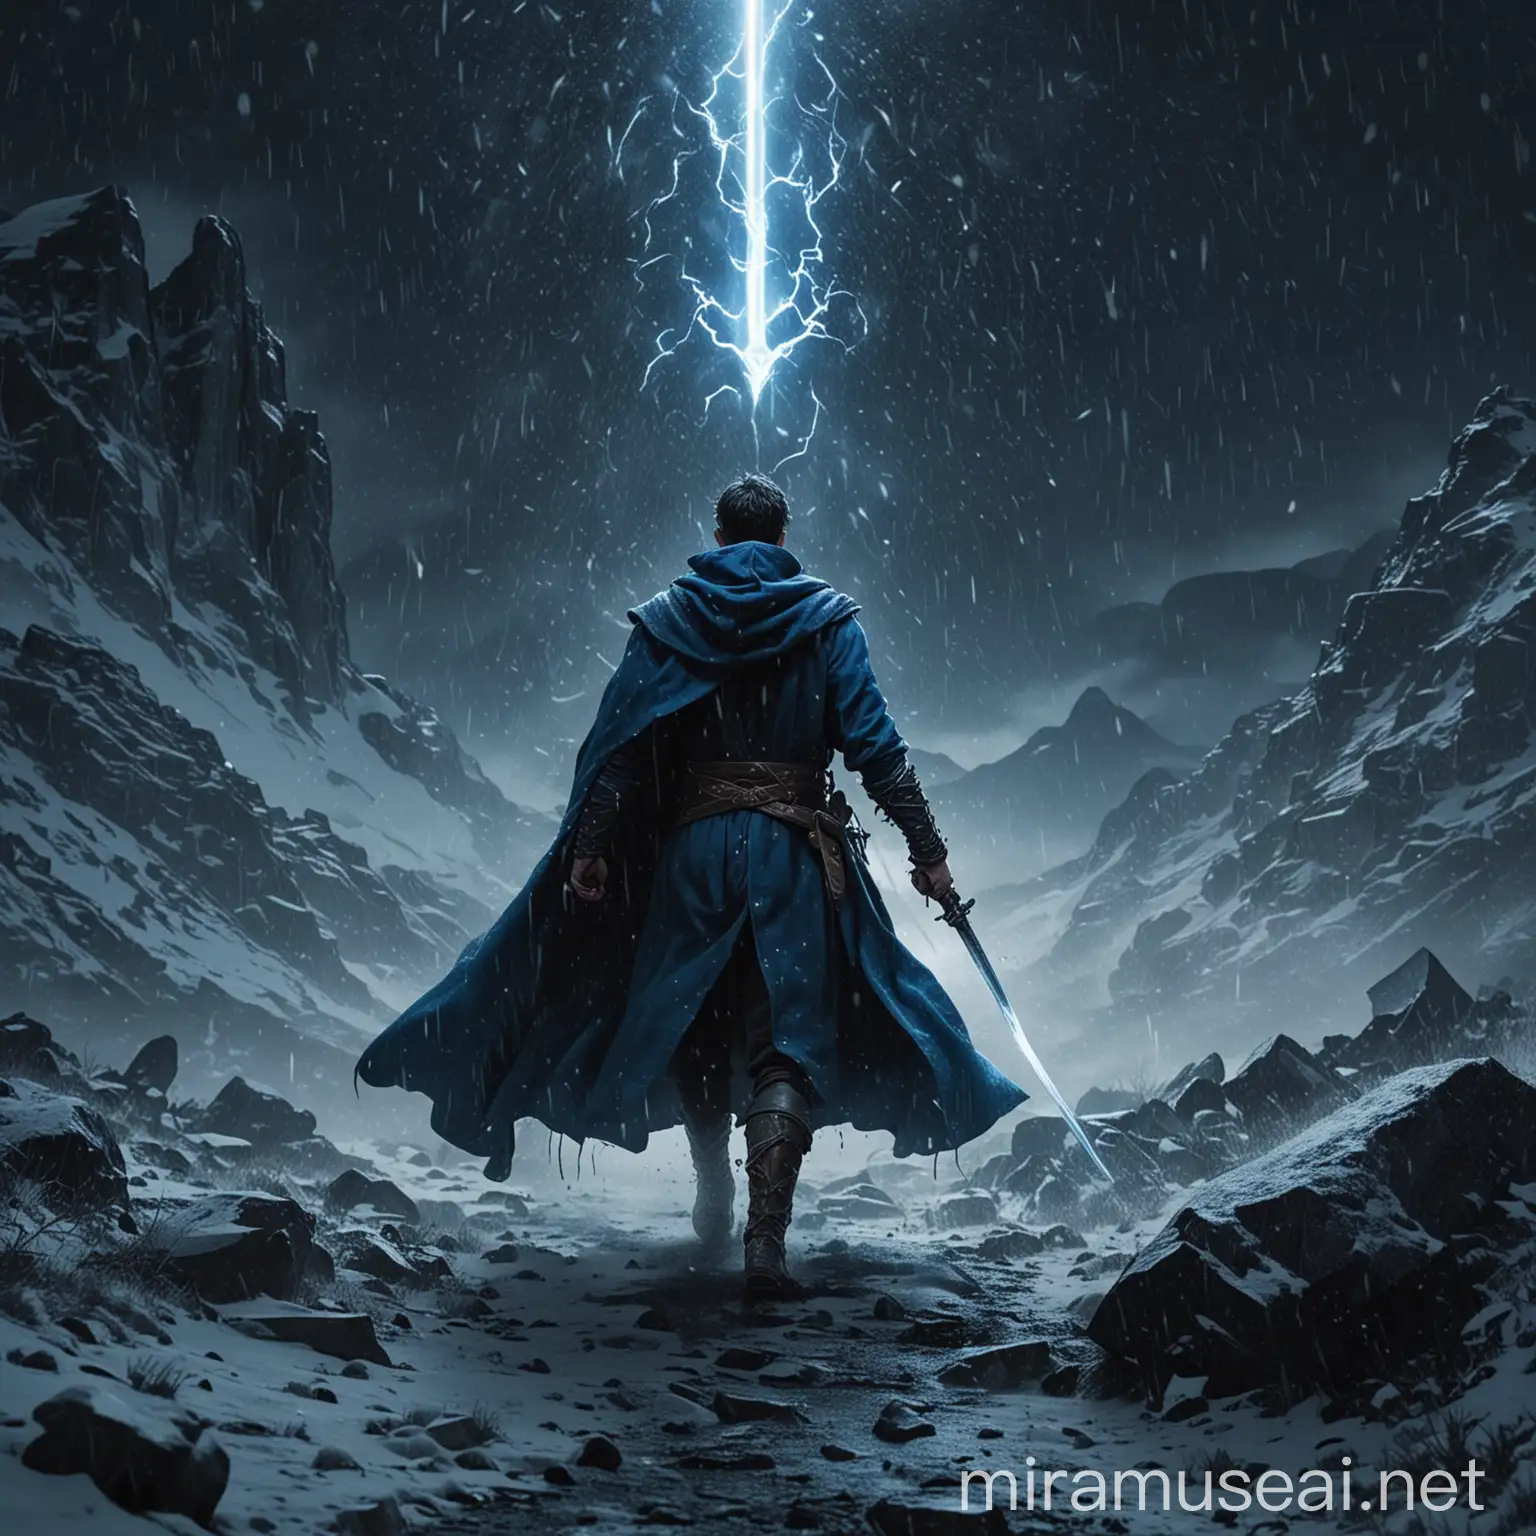 Mysterious Night Wanderer Cloaked Figure with Sword and Mjolnir in Blizzard